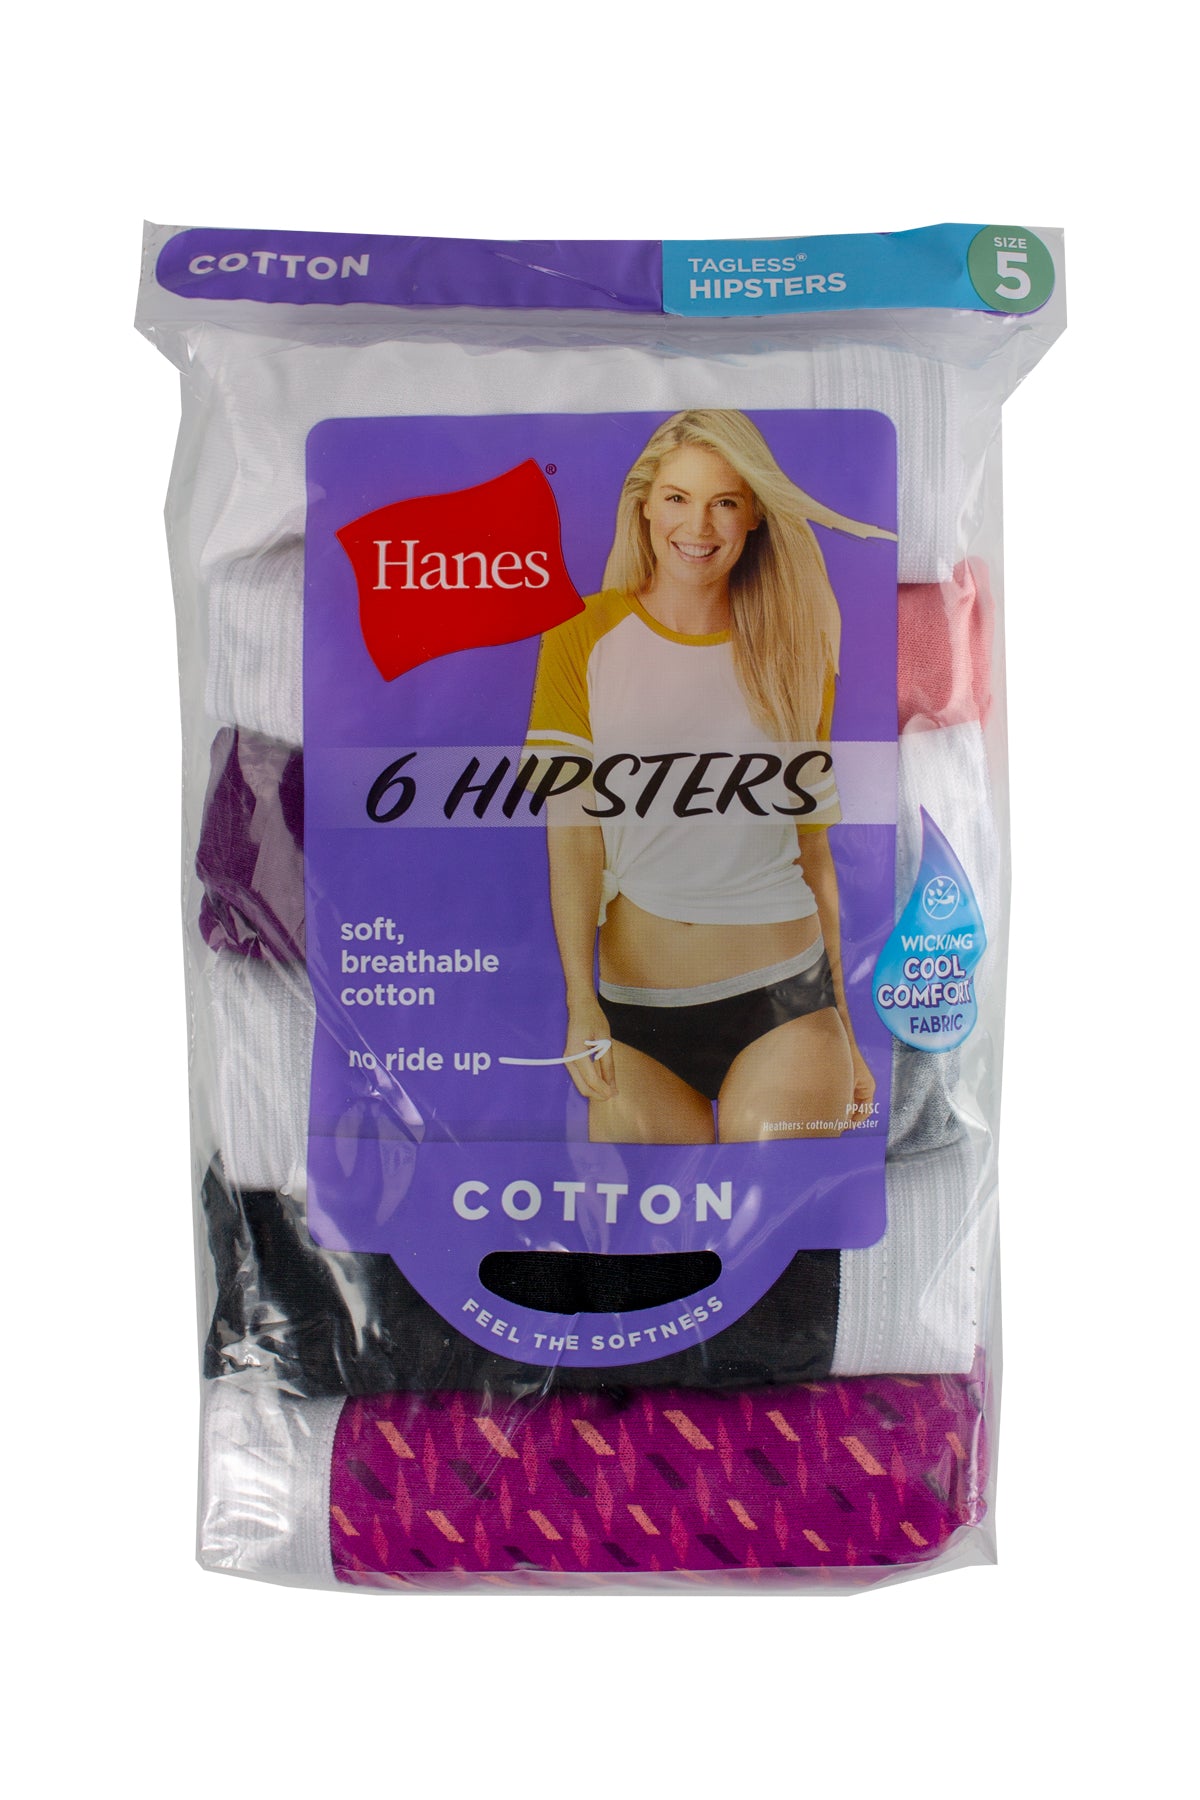 Hanes Women's Cotton Sporty Hipster Panties with Cool Comfort